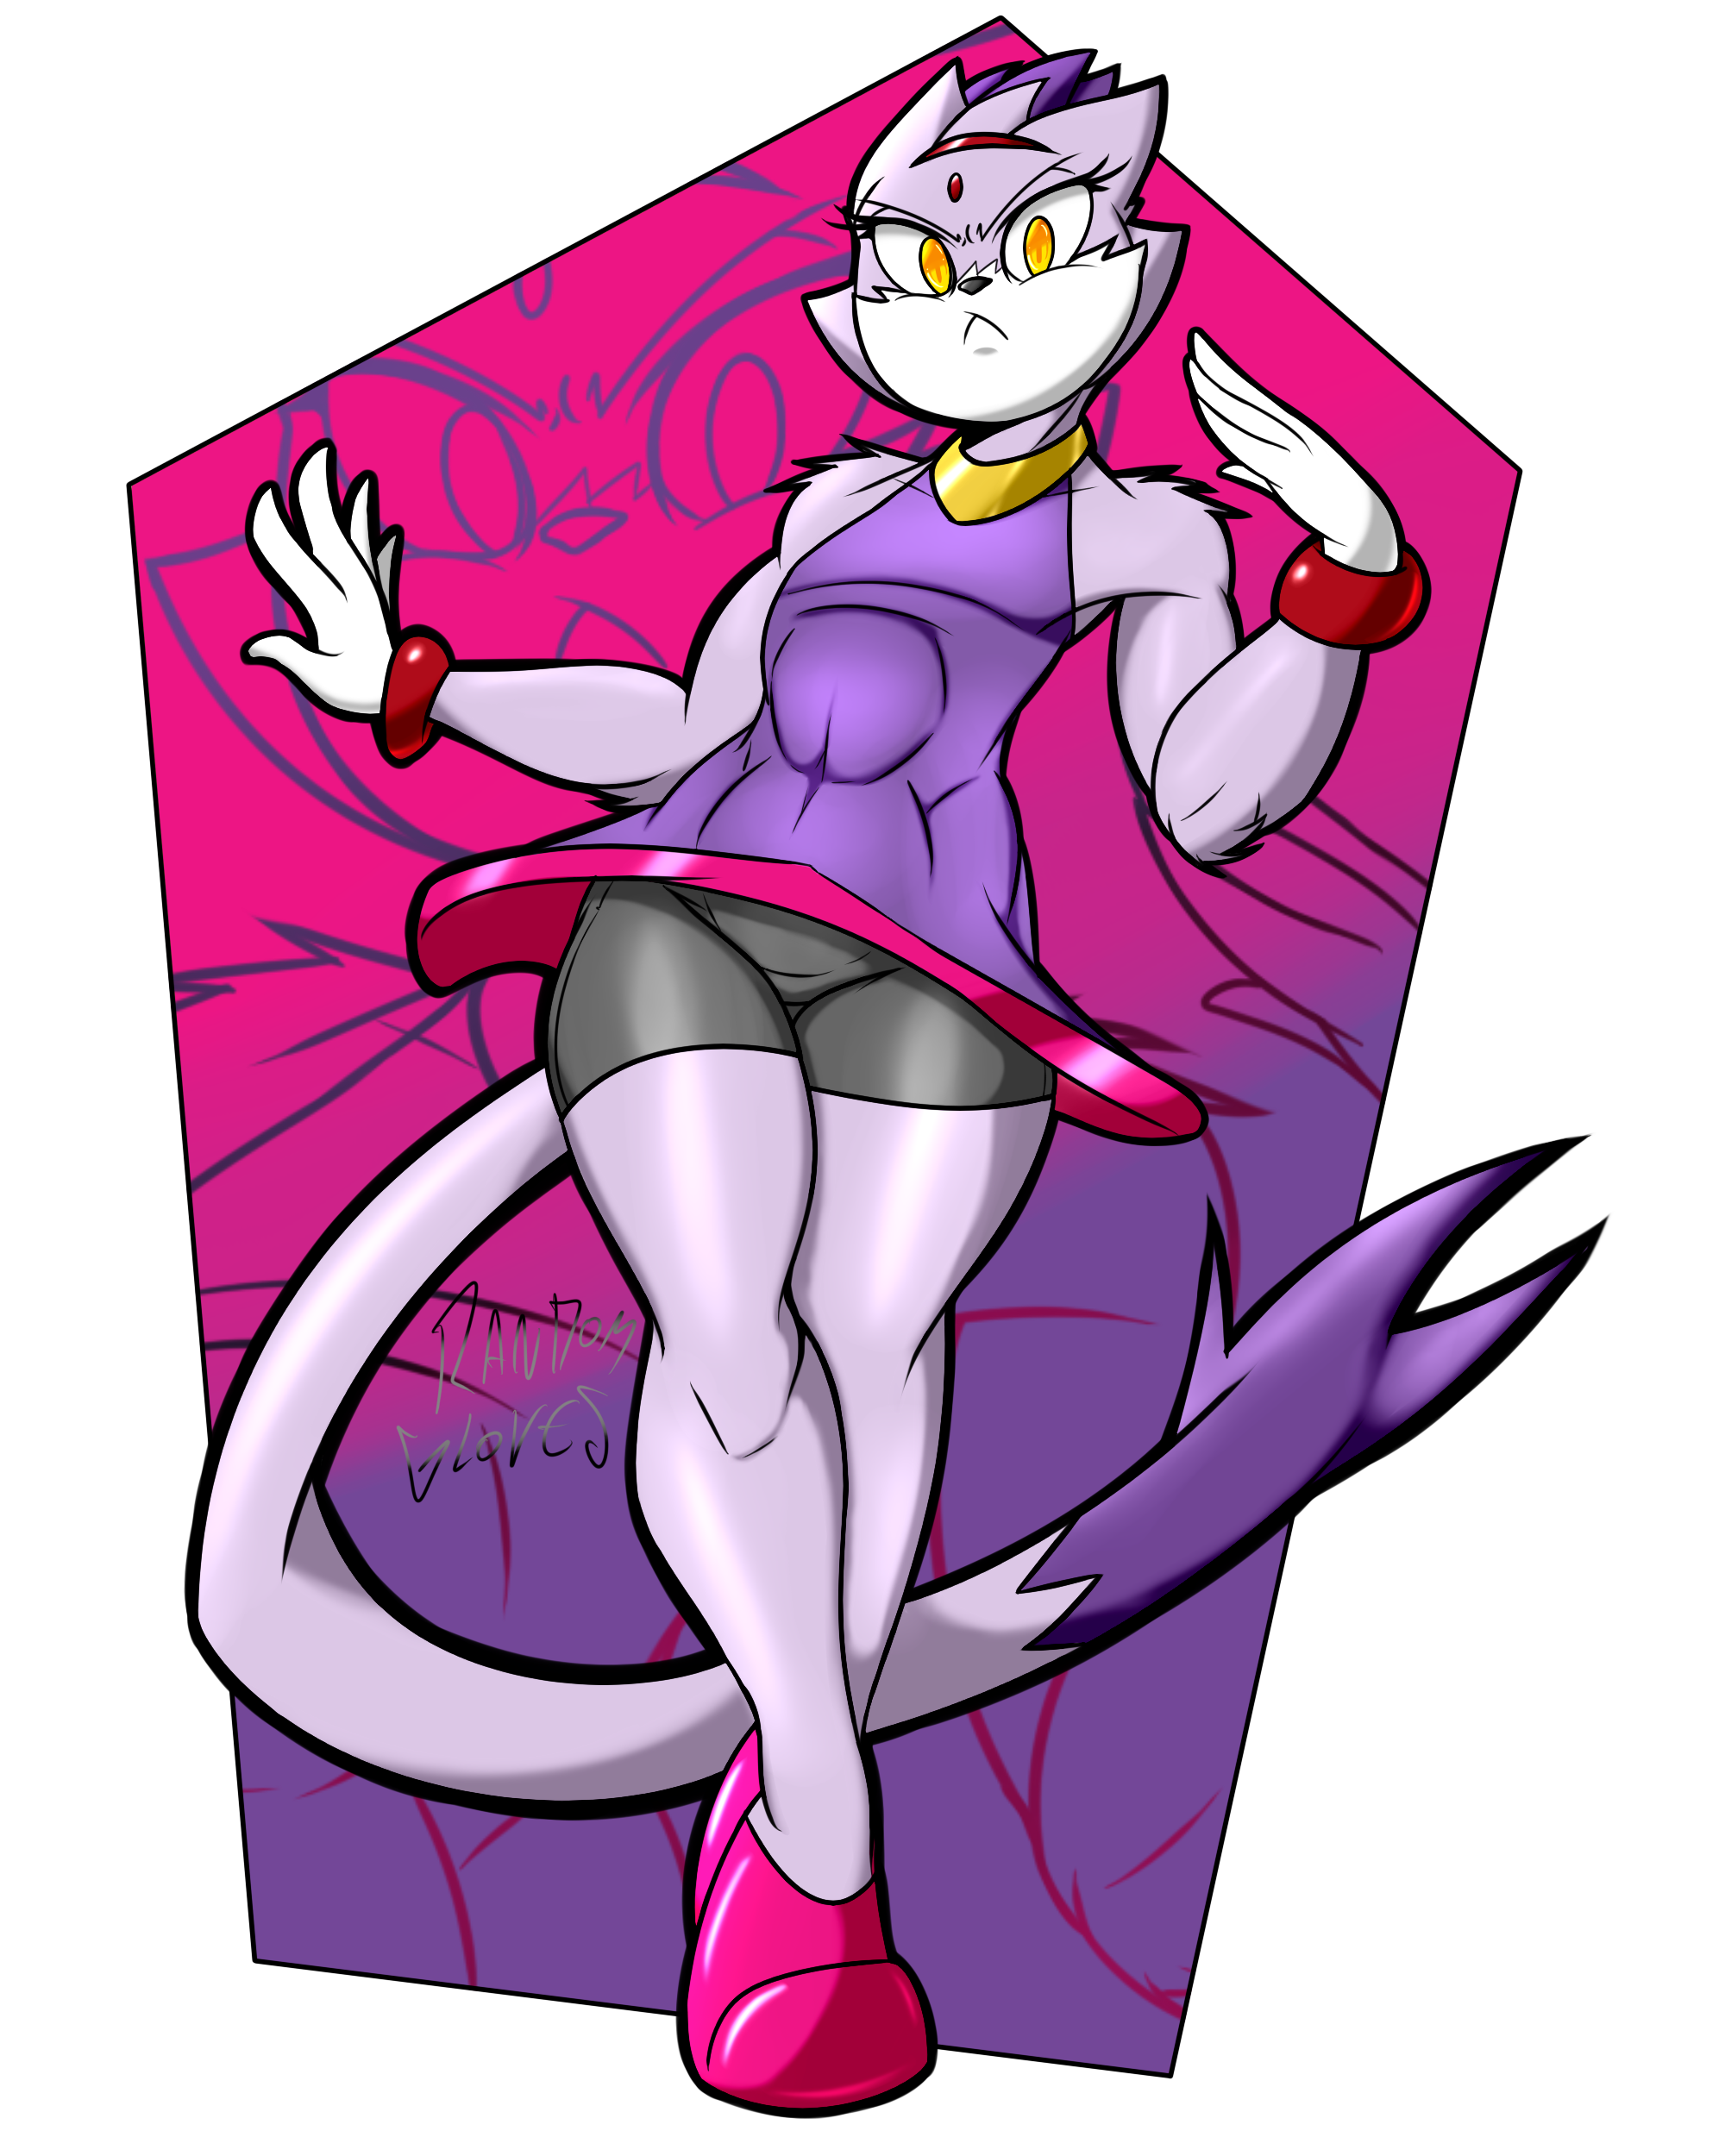 Blaze The Cat Olympics Outfit. 